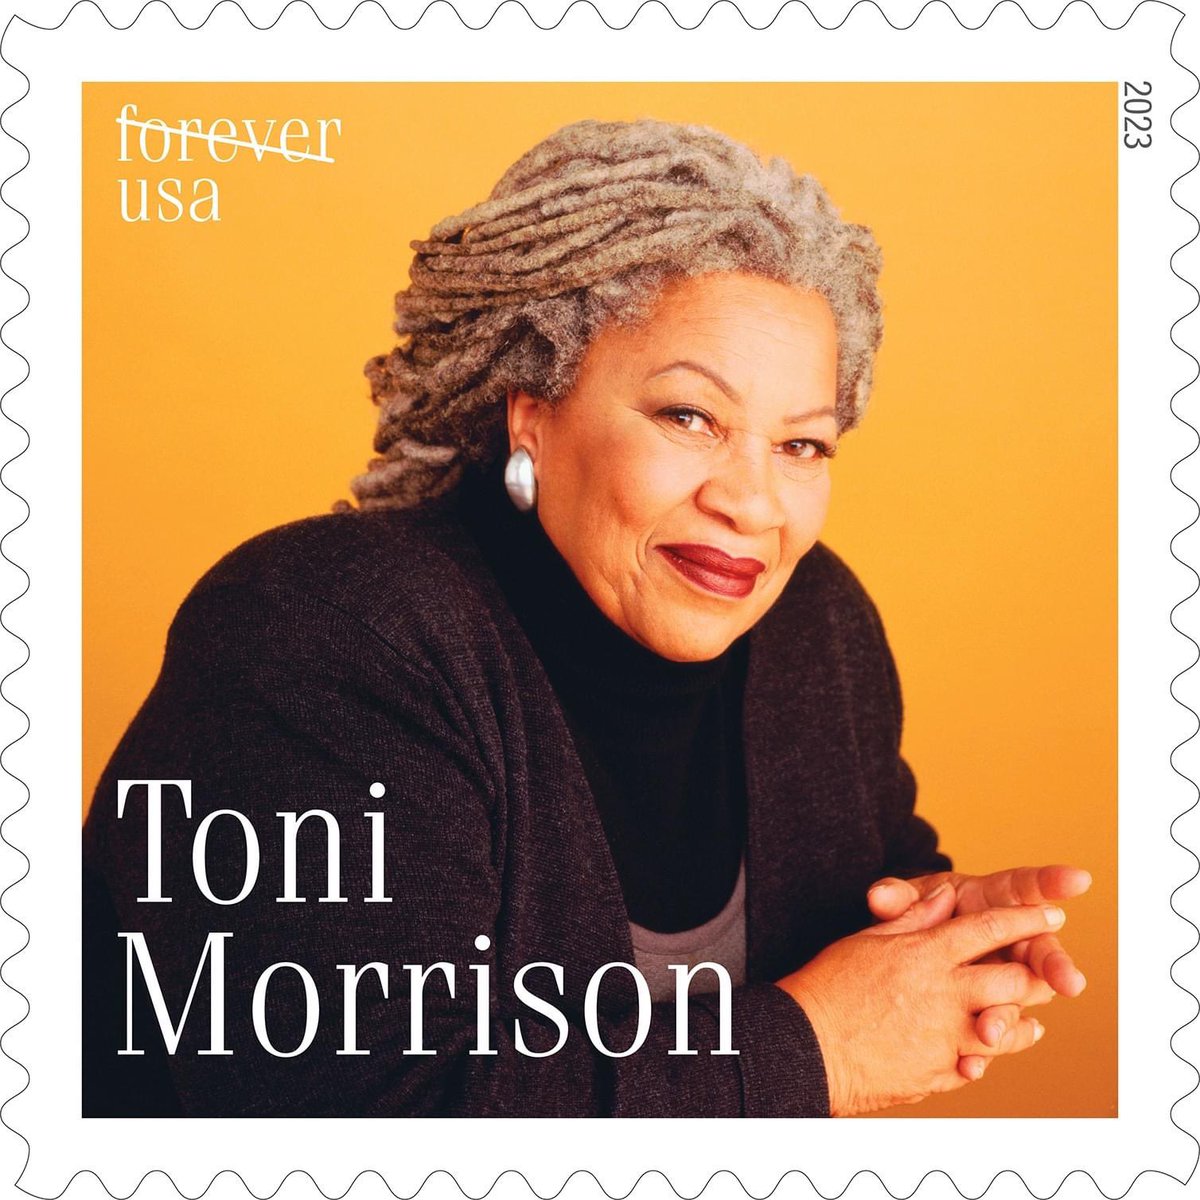 The U.S. Postal Service will honor author Toni Morrison with a Forever stamp at a ceremony at Princeton University on Tuesday, March 7, 2023.

The stamp features a photo taken in 2000 & designed by artist Ethel Kessler. ❤️
#FavoriteAuthor 

facebook.com/events/s/toni-…